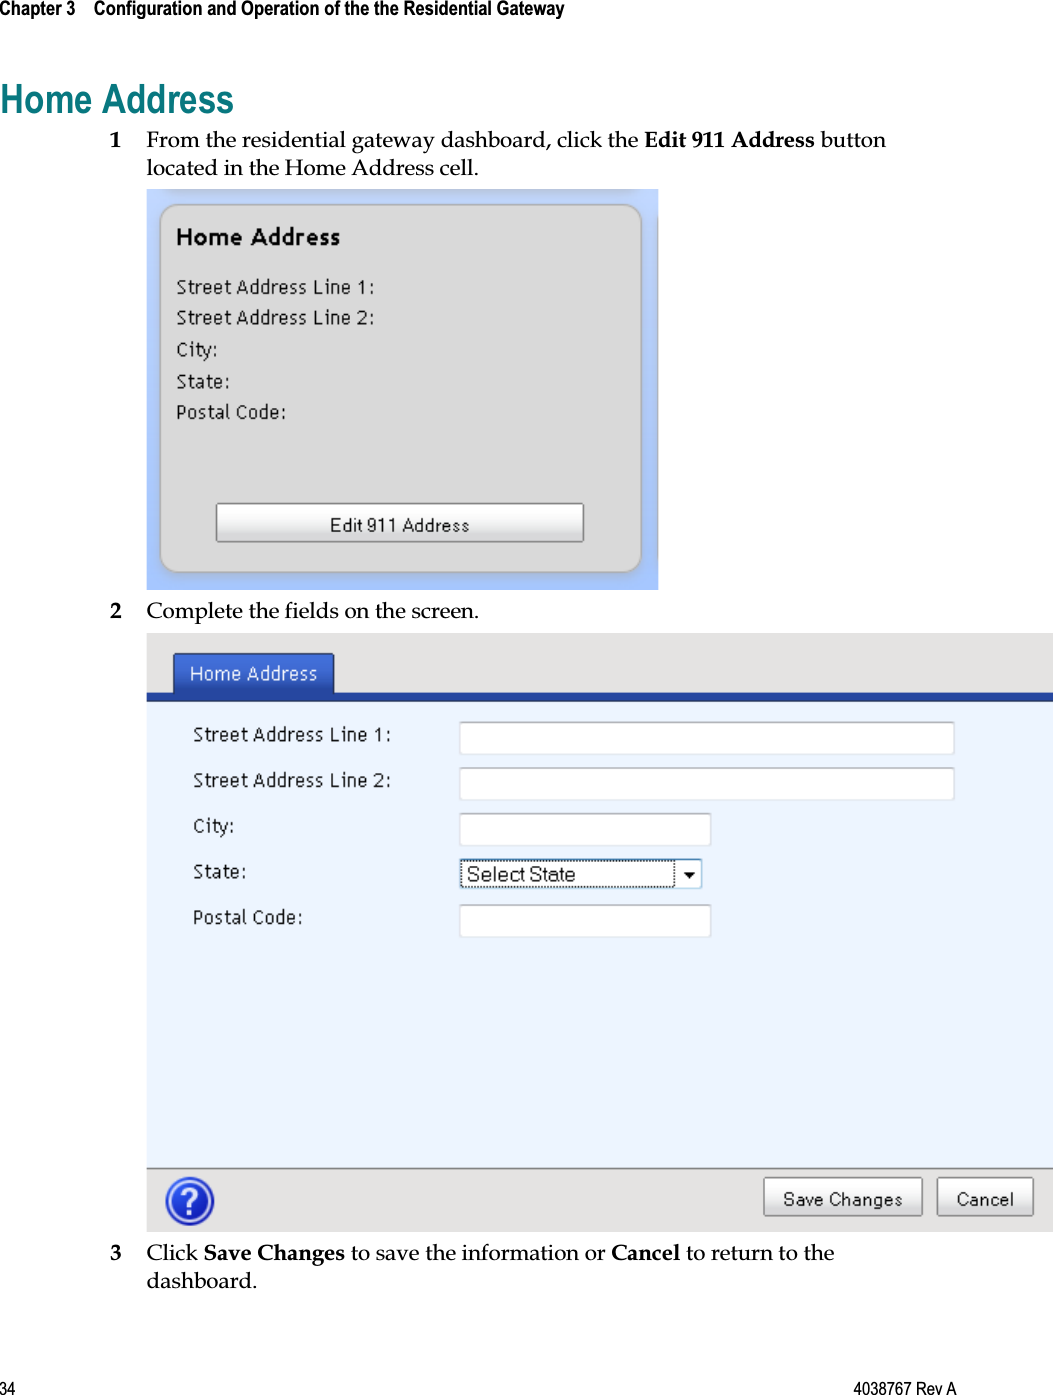  Chapter 3    Configuration and Operation of the the Residential Gateway    34  4038767 Rev A Home Address 1 From the residential gateway dashboard, click the Edit 911 Address button located in the Home Address cell.  2 Complete the fields on the screen.  3 Click Save Changes to save the information or Cancel to return to the dashboard.  